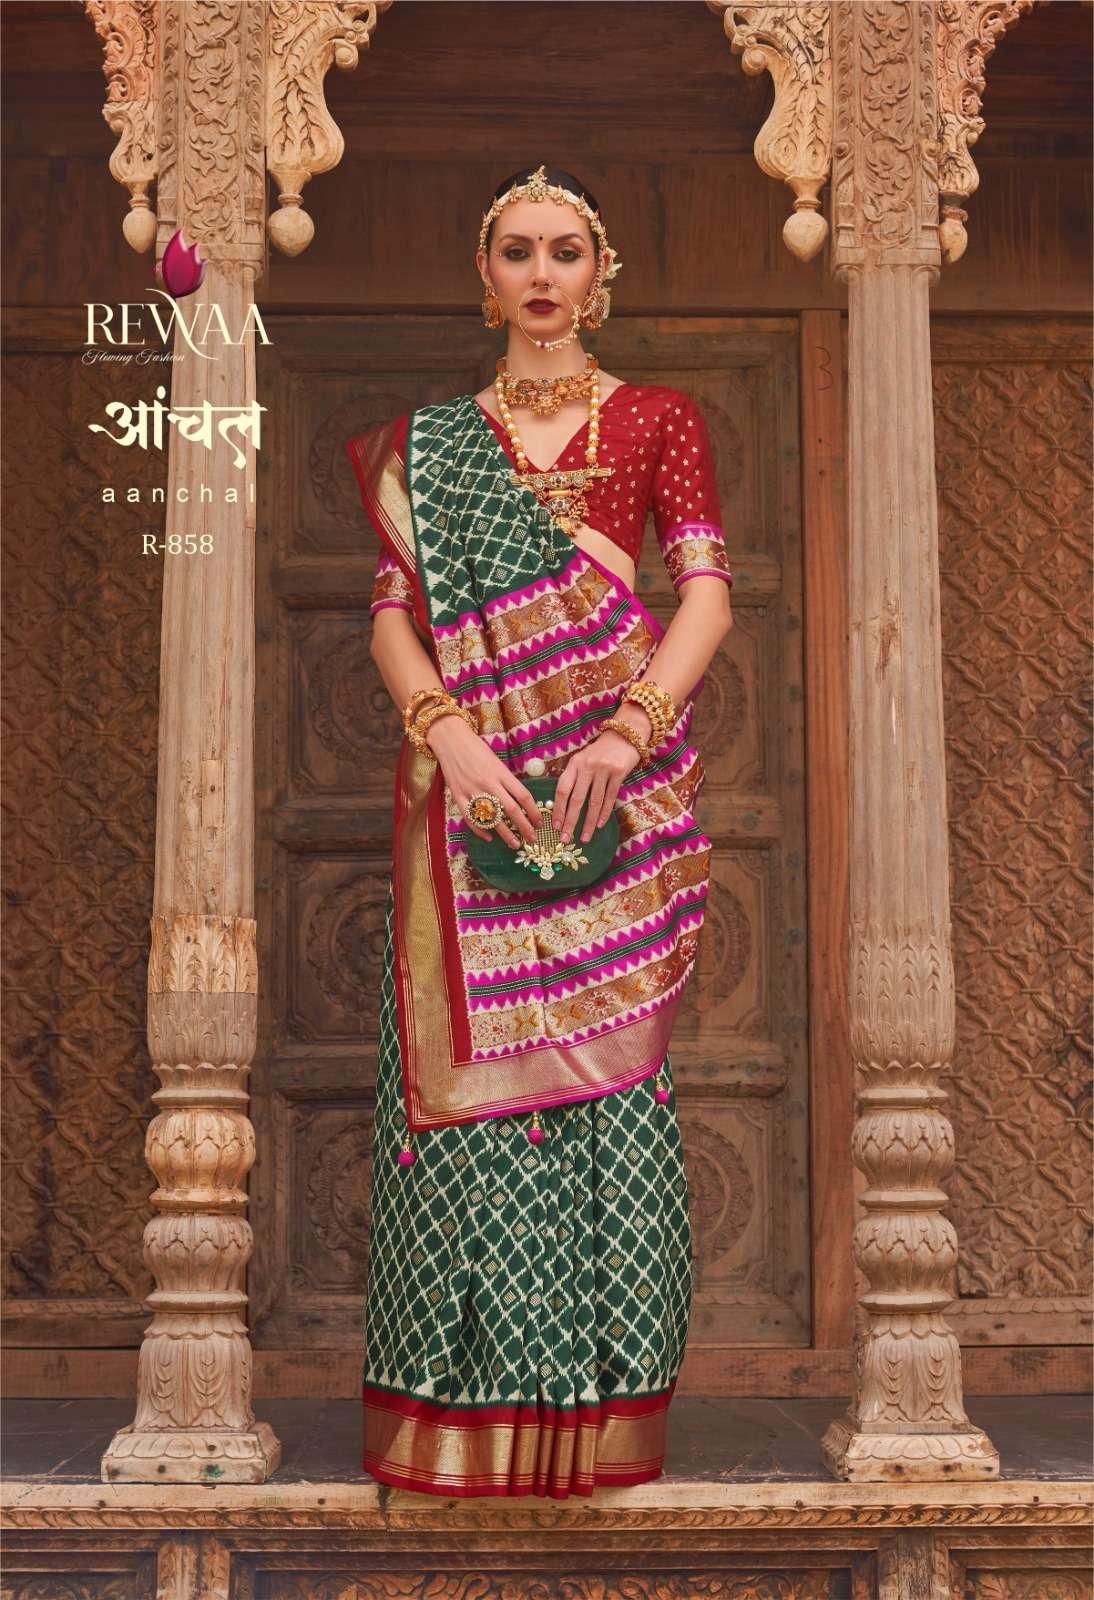 Manjula Presents Reewa Aanchal R-858 To R- 569 Series Latest Designer Saree Collection At Best Wholesale Price 